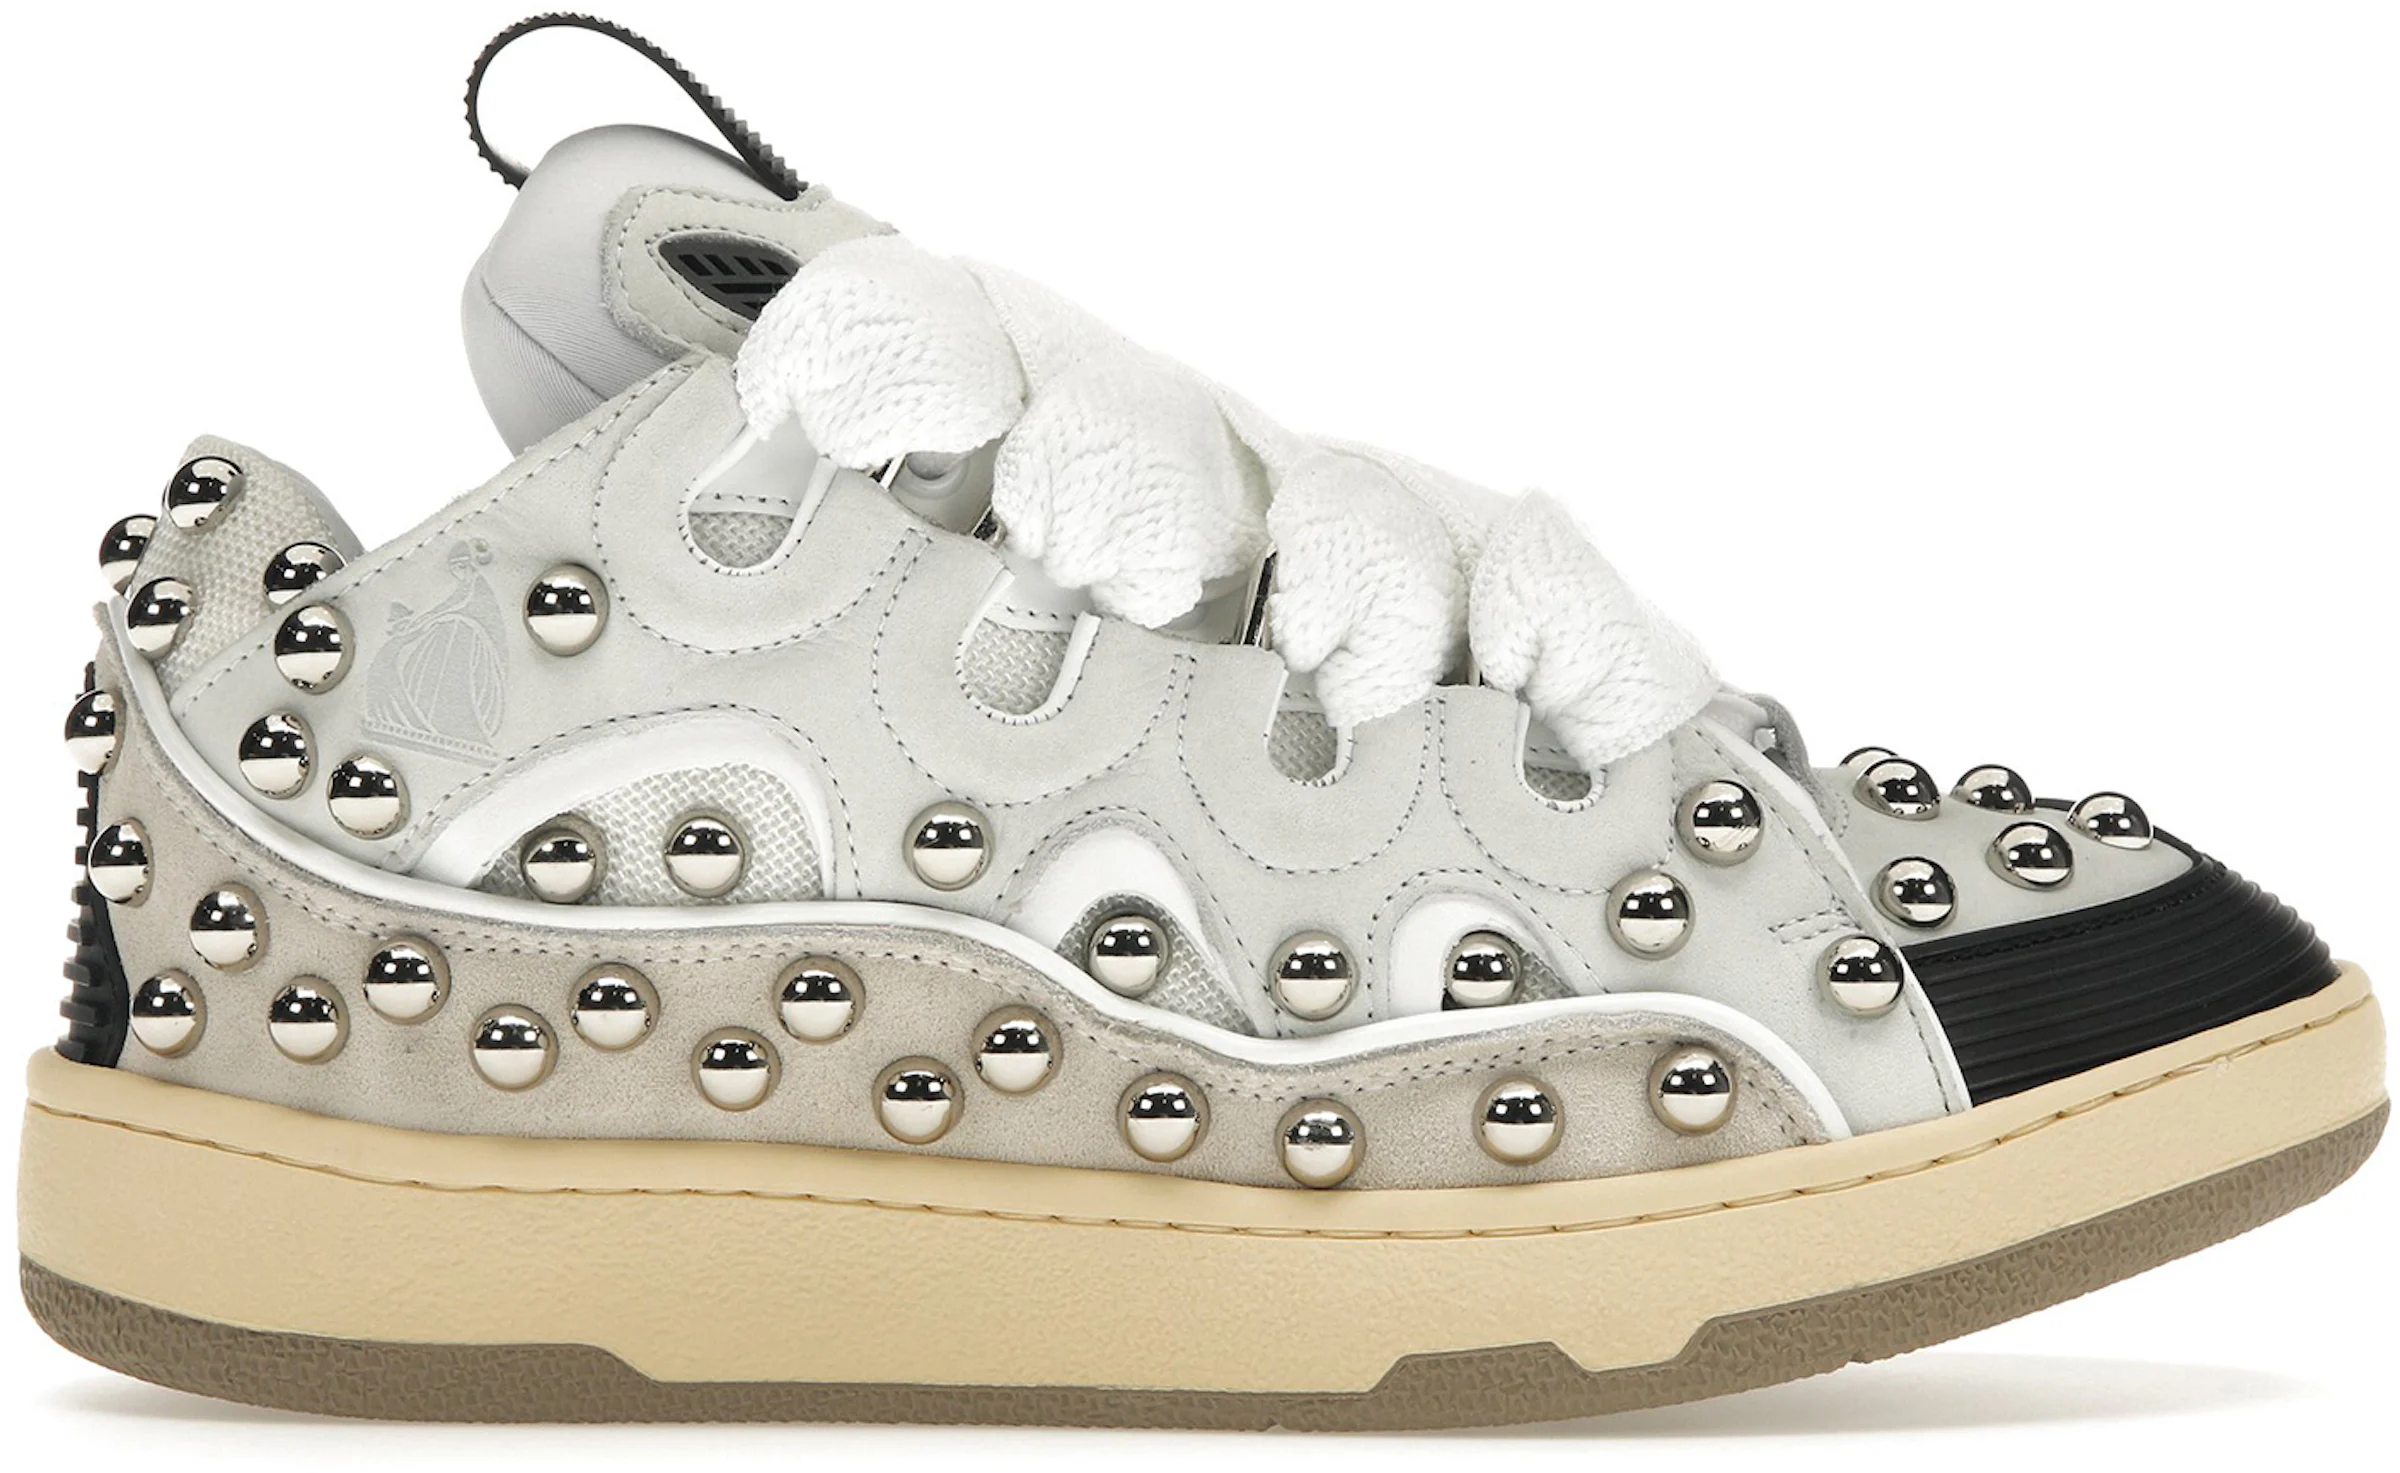 Lanvin Studded Leather Curb Sneaker White (Women's